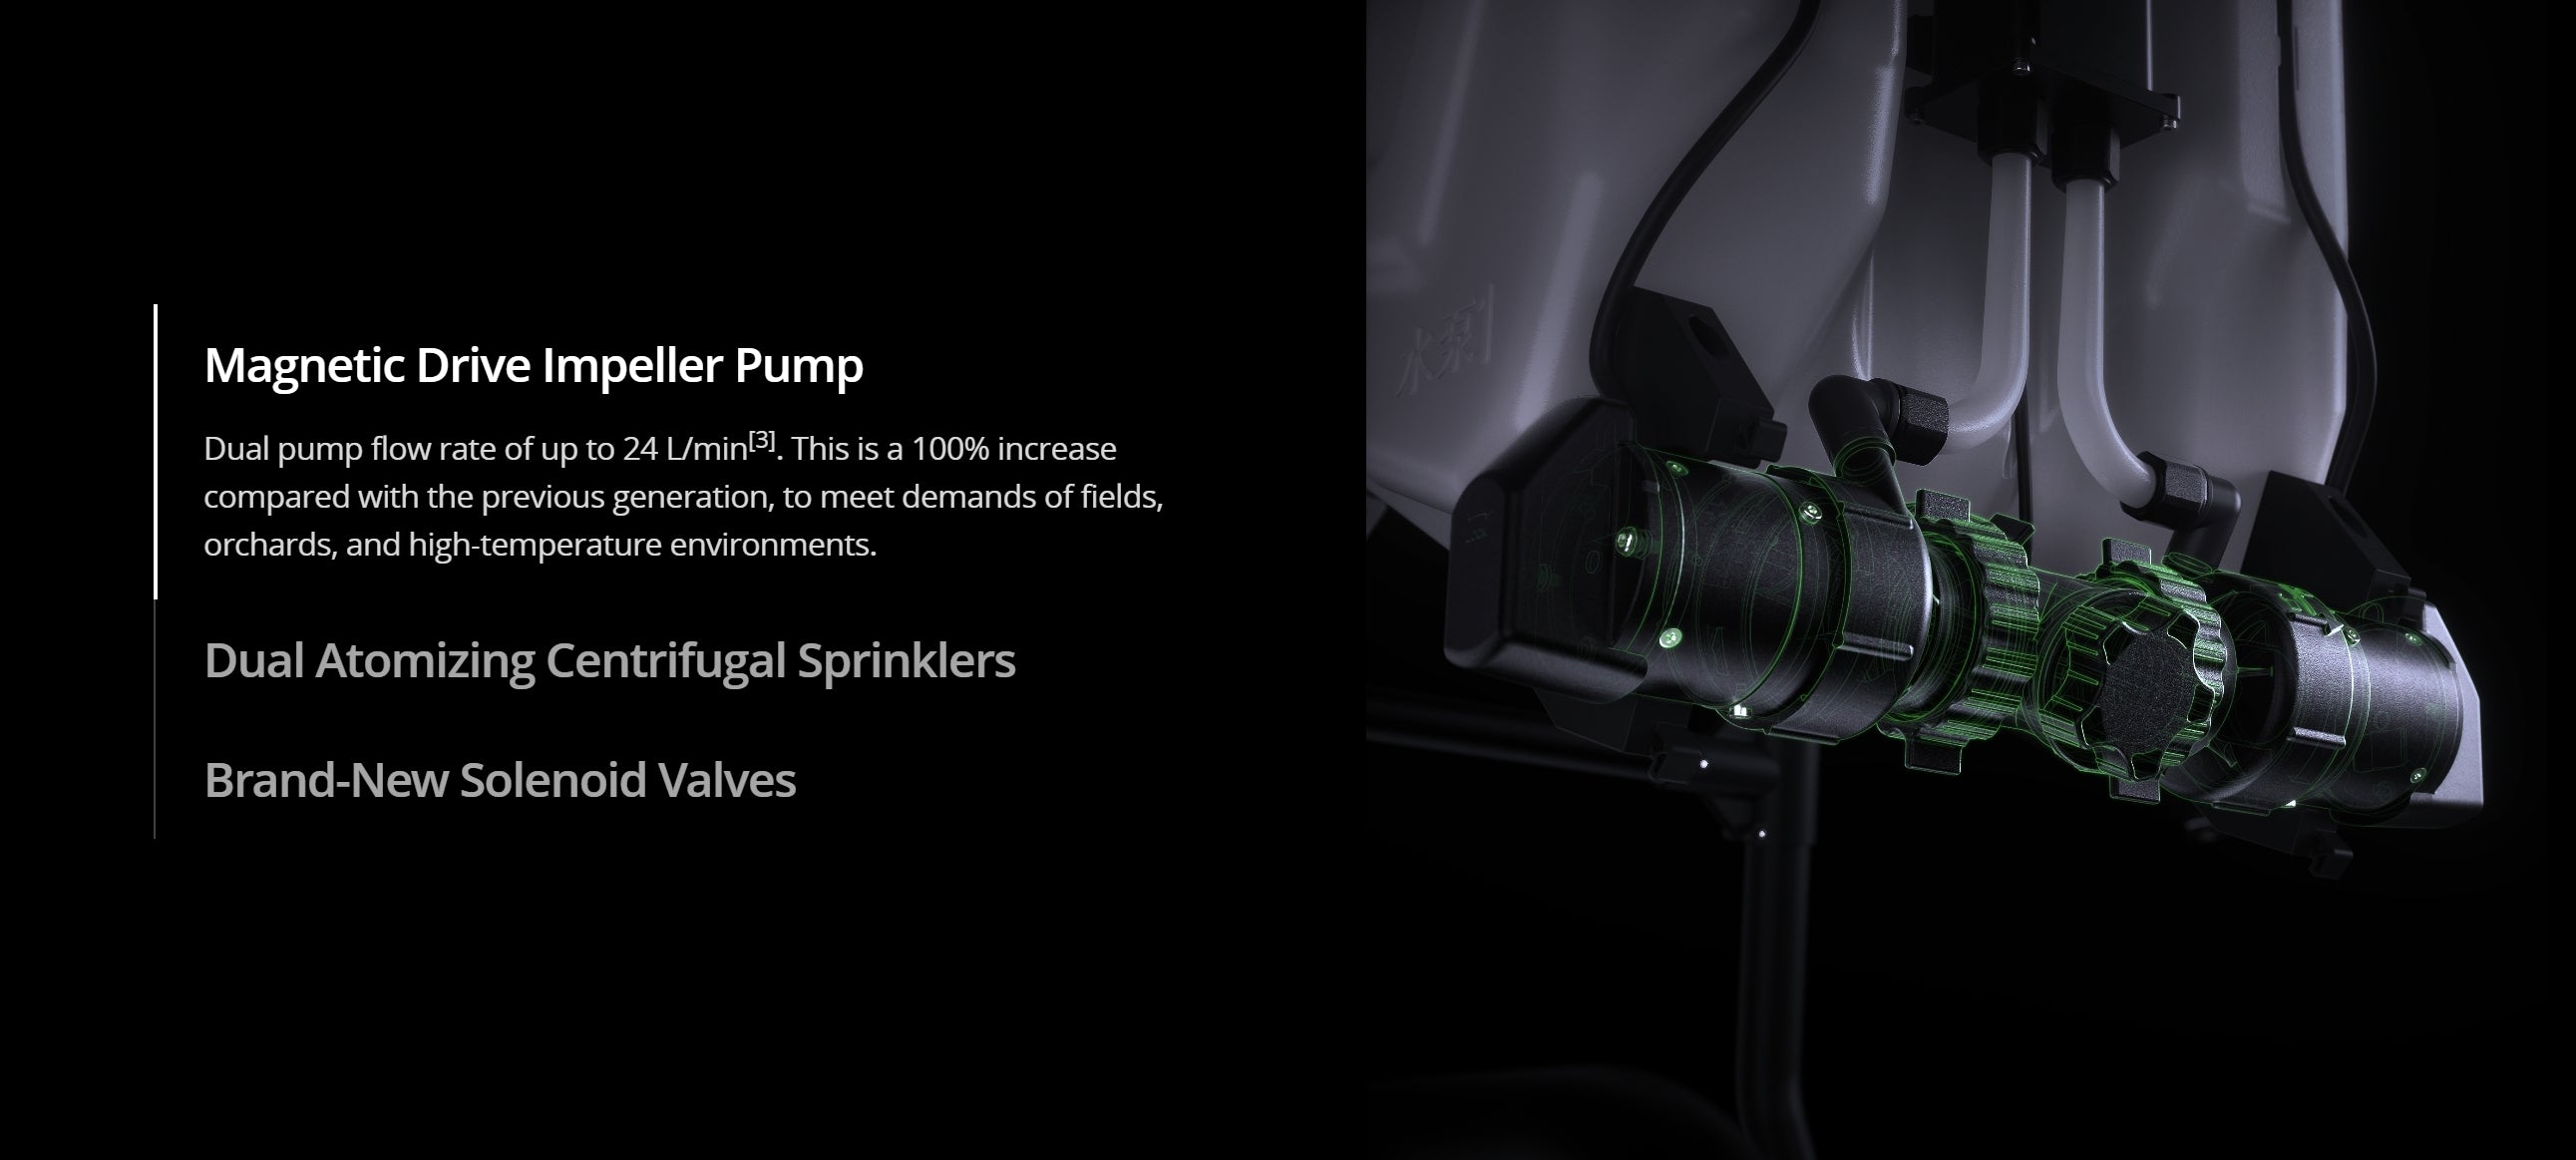 DJI Agras T50 , Magnetic drive impeller pump drone delivers increased flow rate for agriculture and high-temp applications.